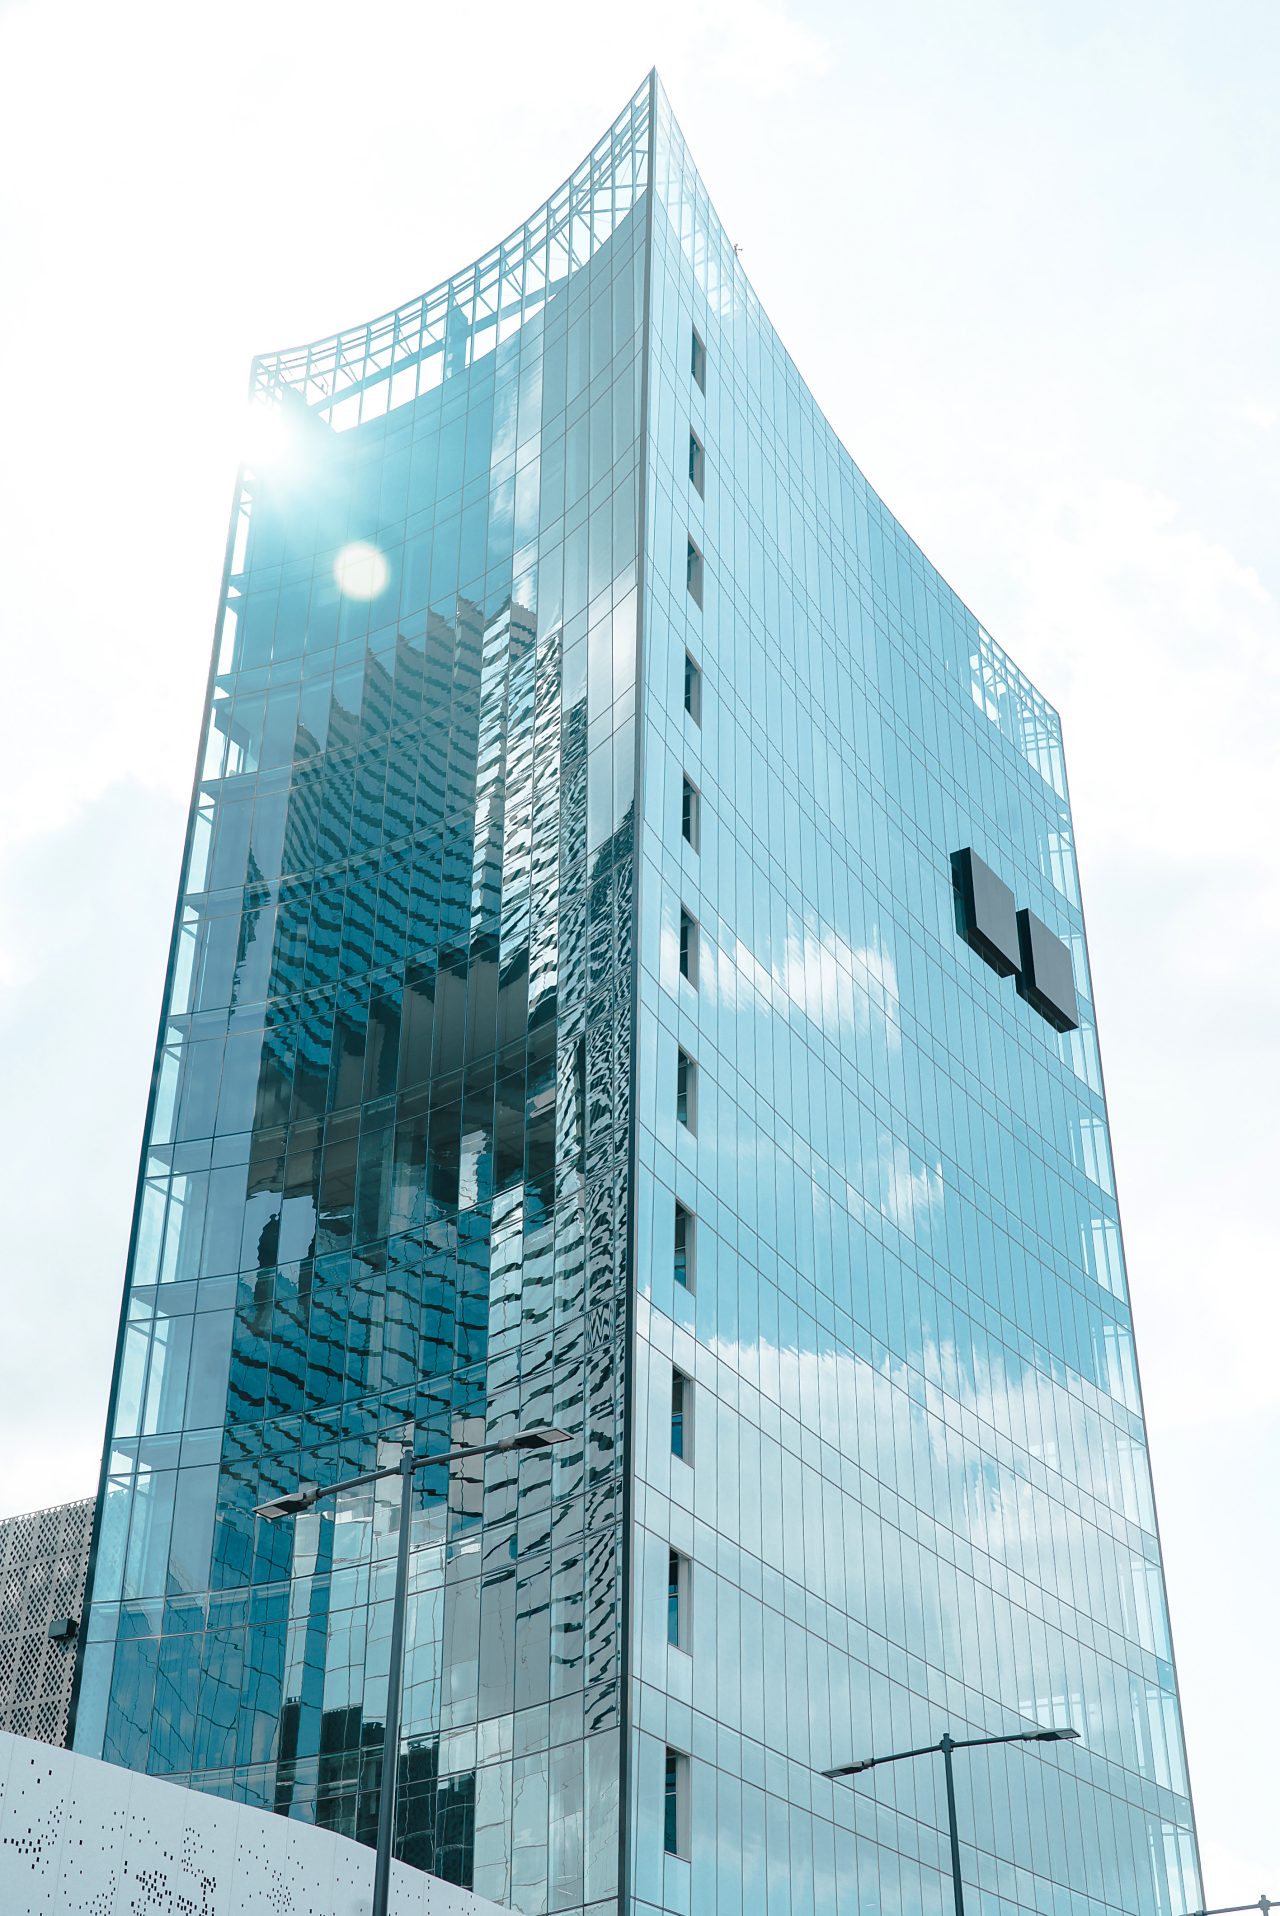 The Komplex Tower in Puebla, Mexico by the Architect Juan Pablo Kuri features SunGuard® AG 50 on Clear Glass. The high-performance glass tower rises in the skyline of the city framed with the futuristic facade of the shopping center representing an important place for business, leisure and lifestyle.